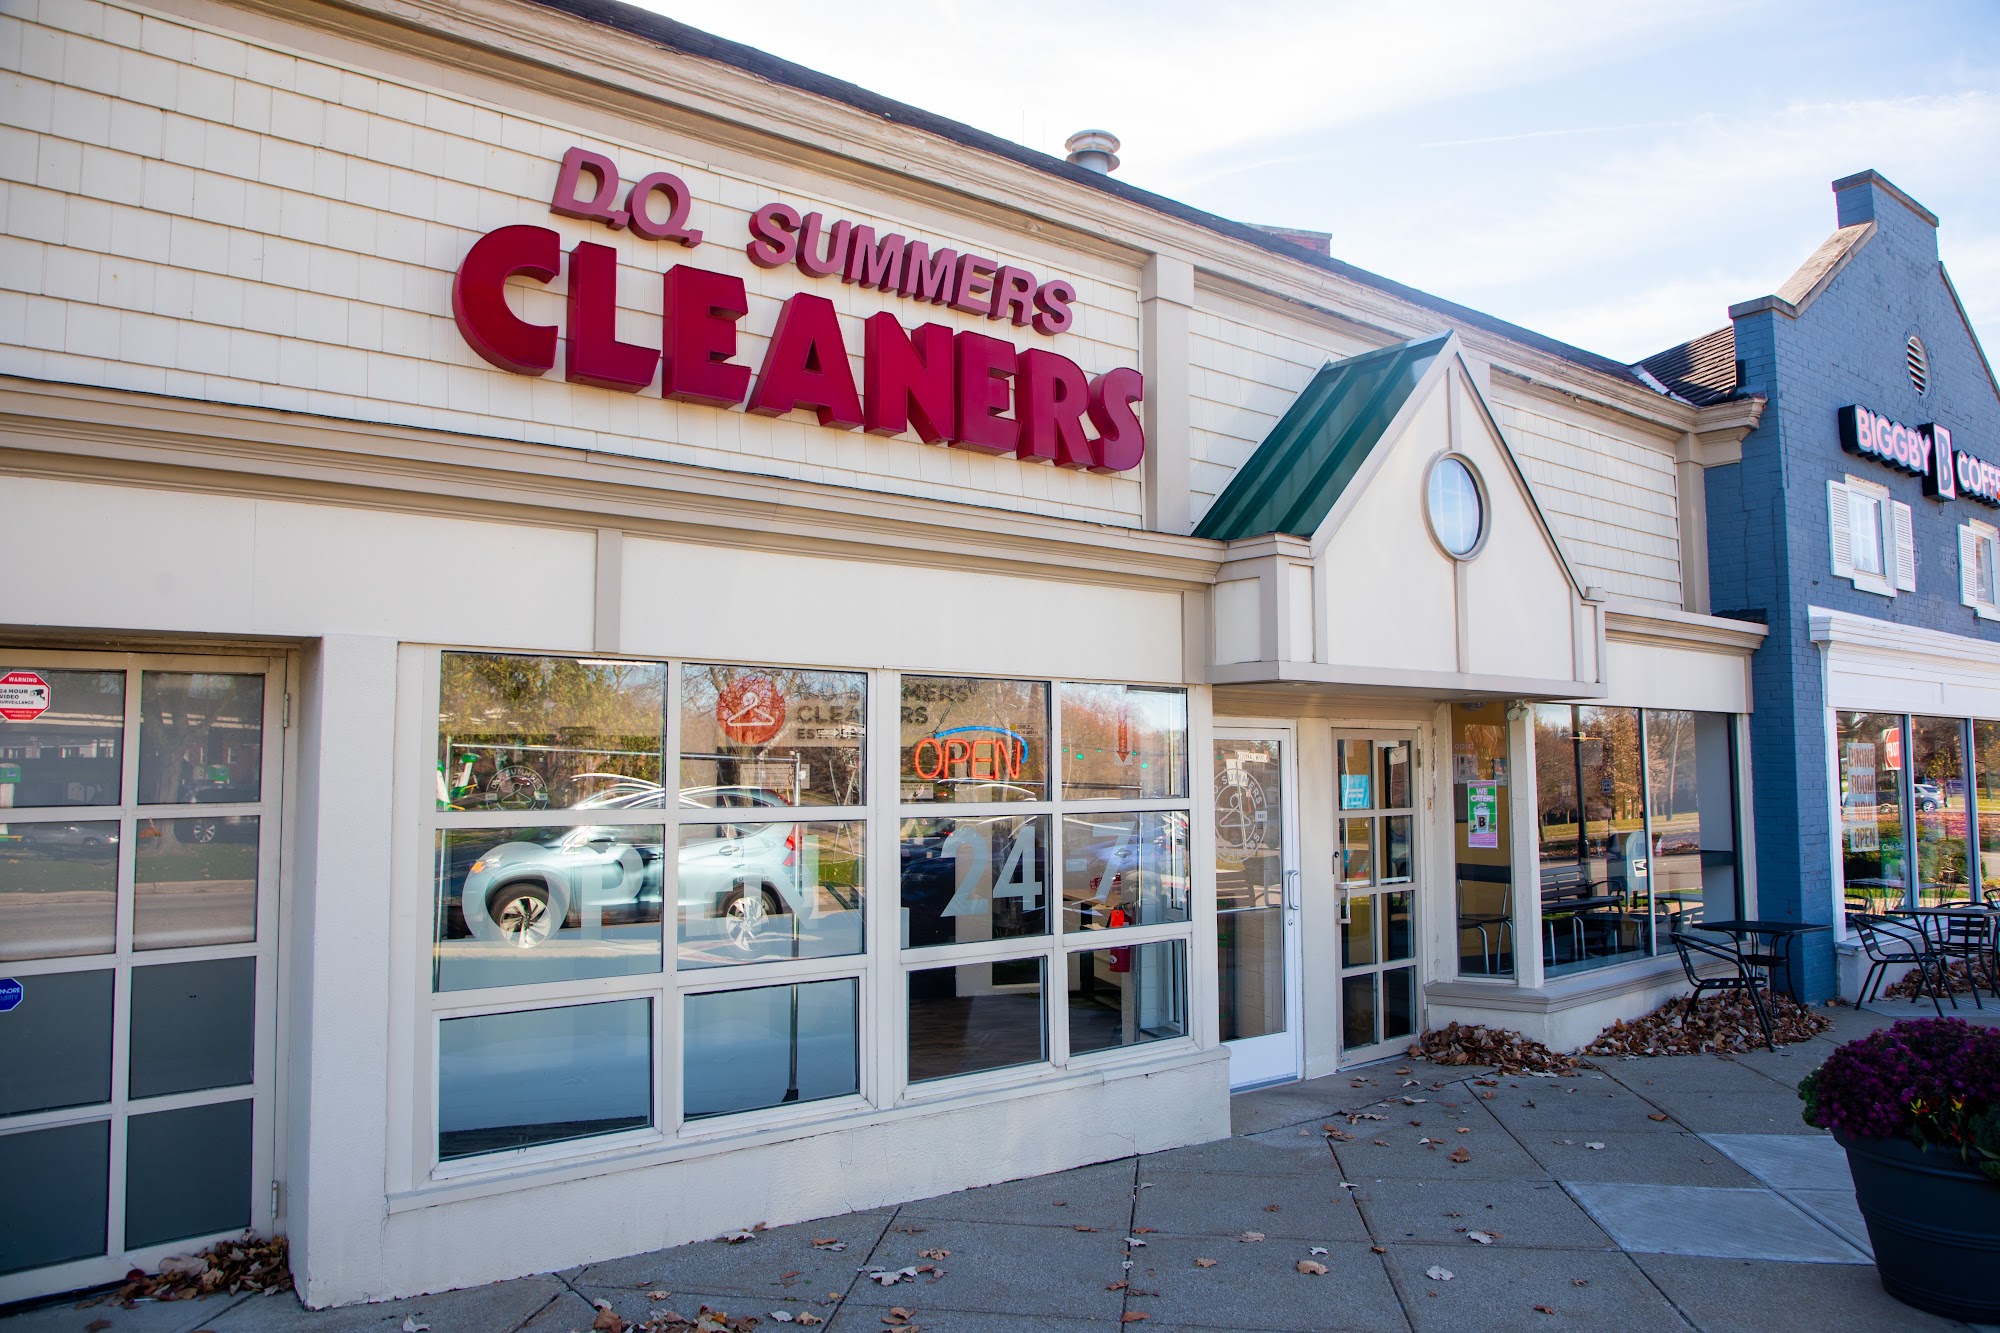 D.O. Summers Cleaners & Laundry - University Heights